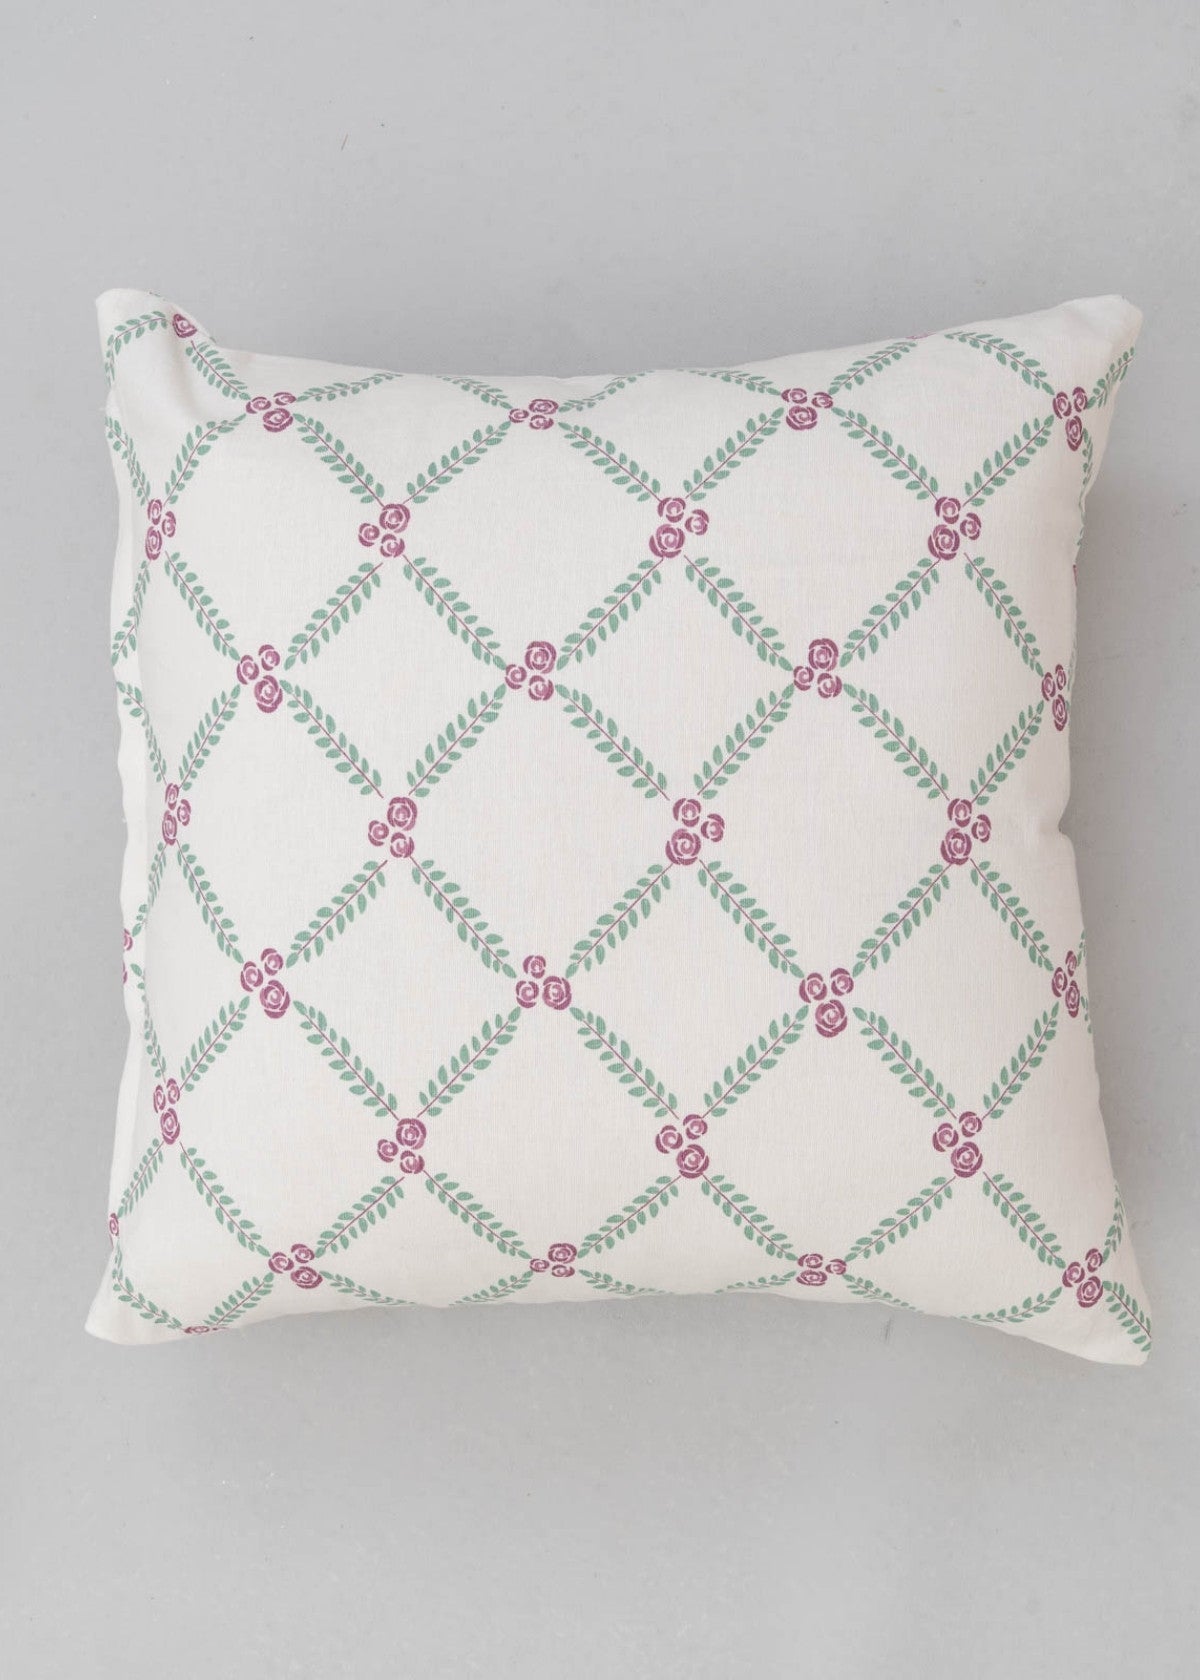 Climbing Roses Printed Cotton Cushion Cover - Lavender